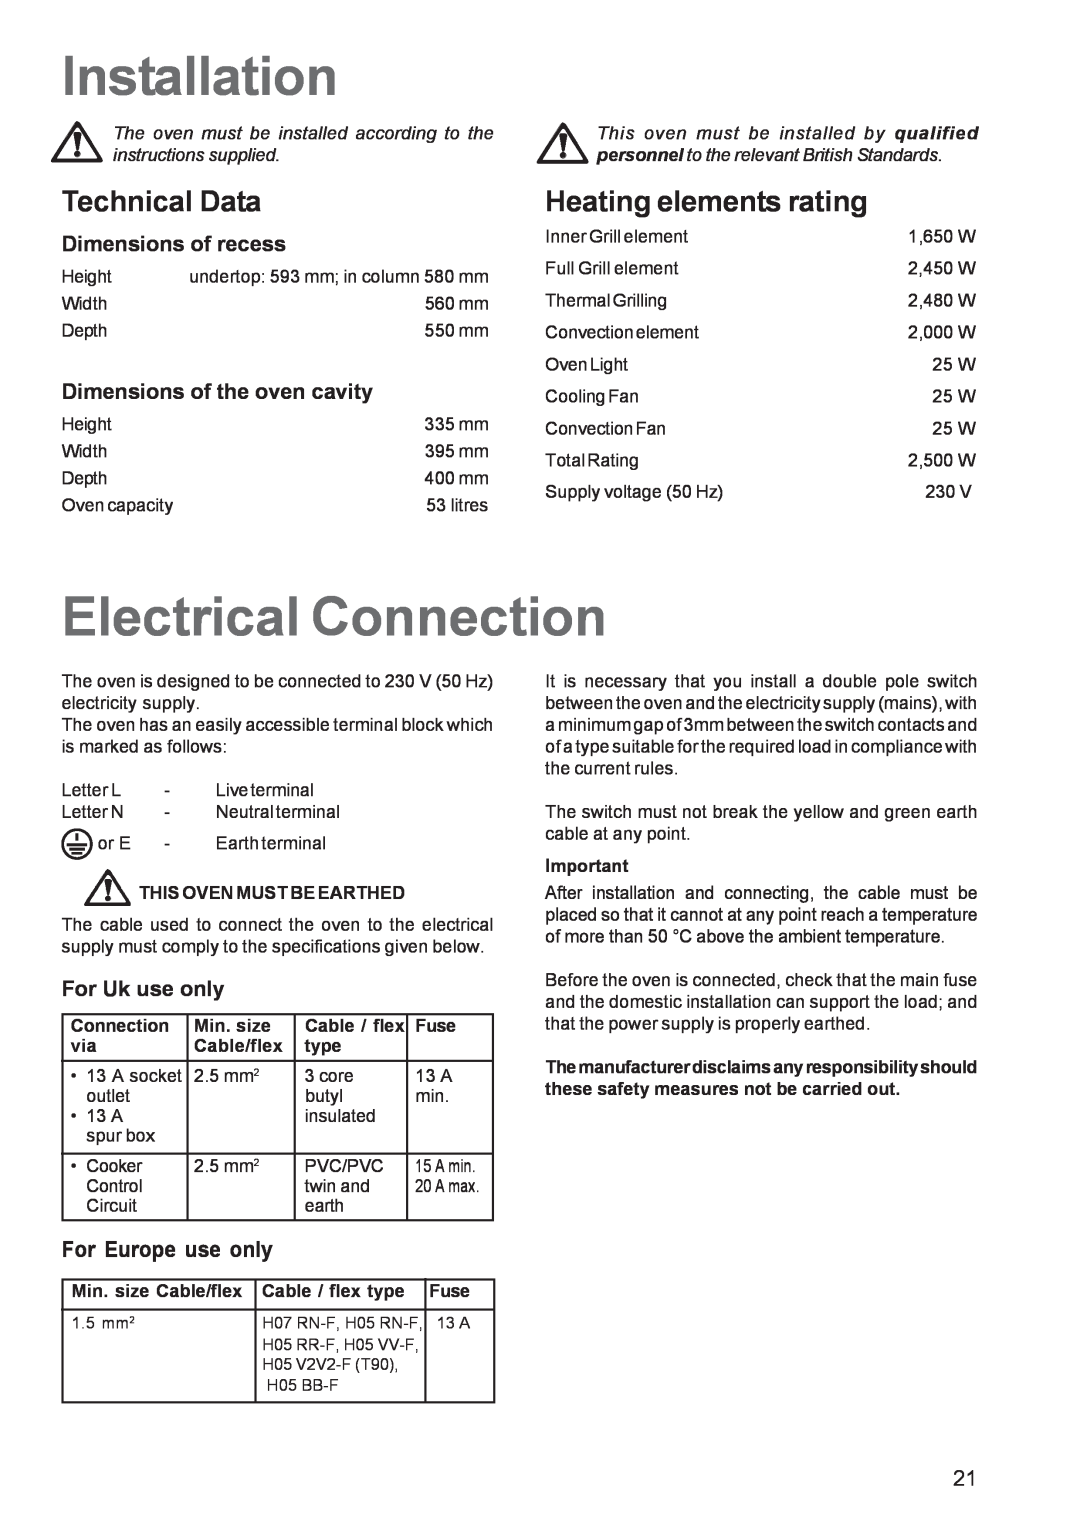 Zanussi ZBF 569 Installation, Electrical Connection, Technical Data, Dimensions of recess, Dimensions of the oven cavity 